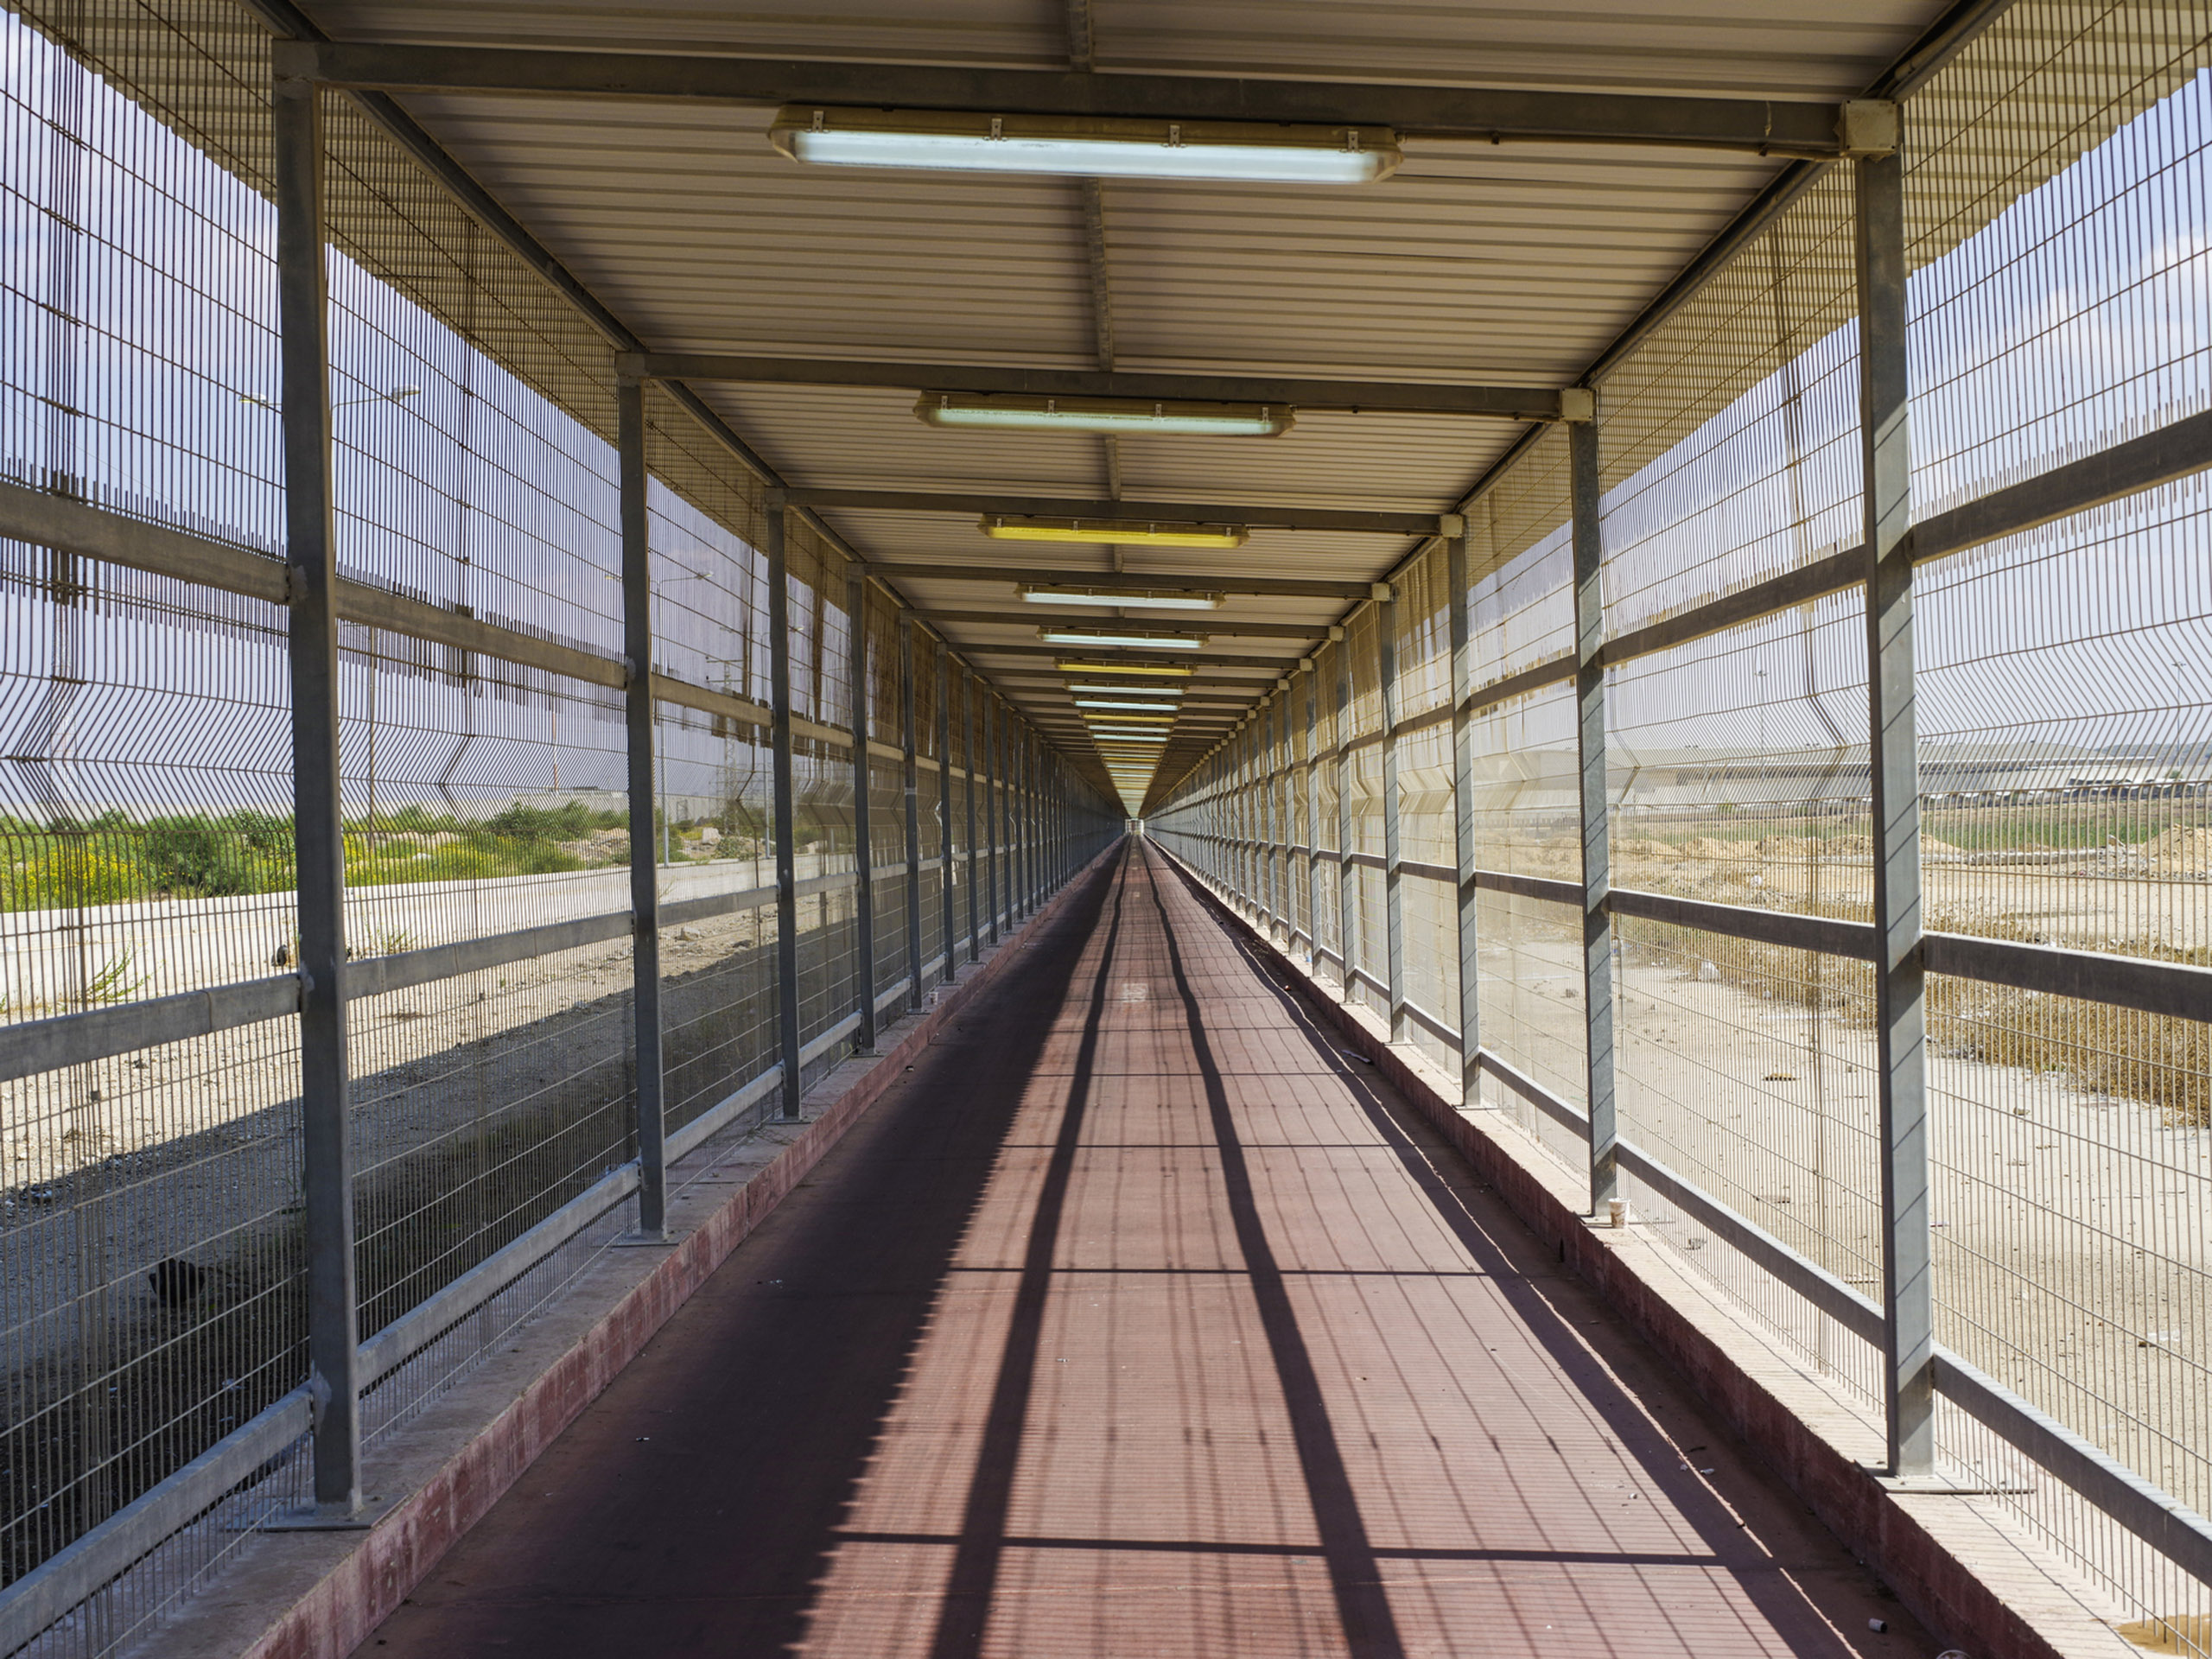 A caged path leads into and out of Gaza from the Erez crossing in Israel.